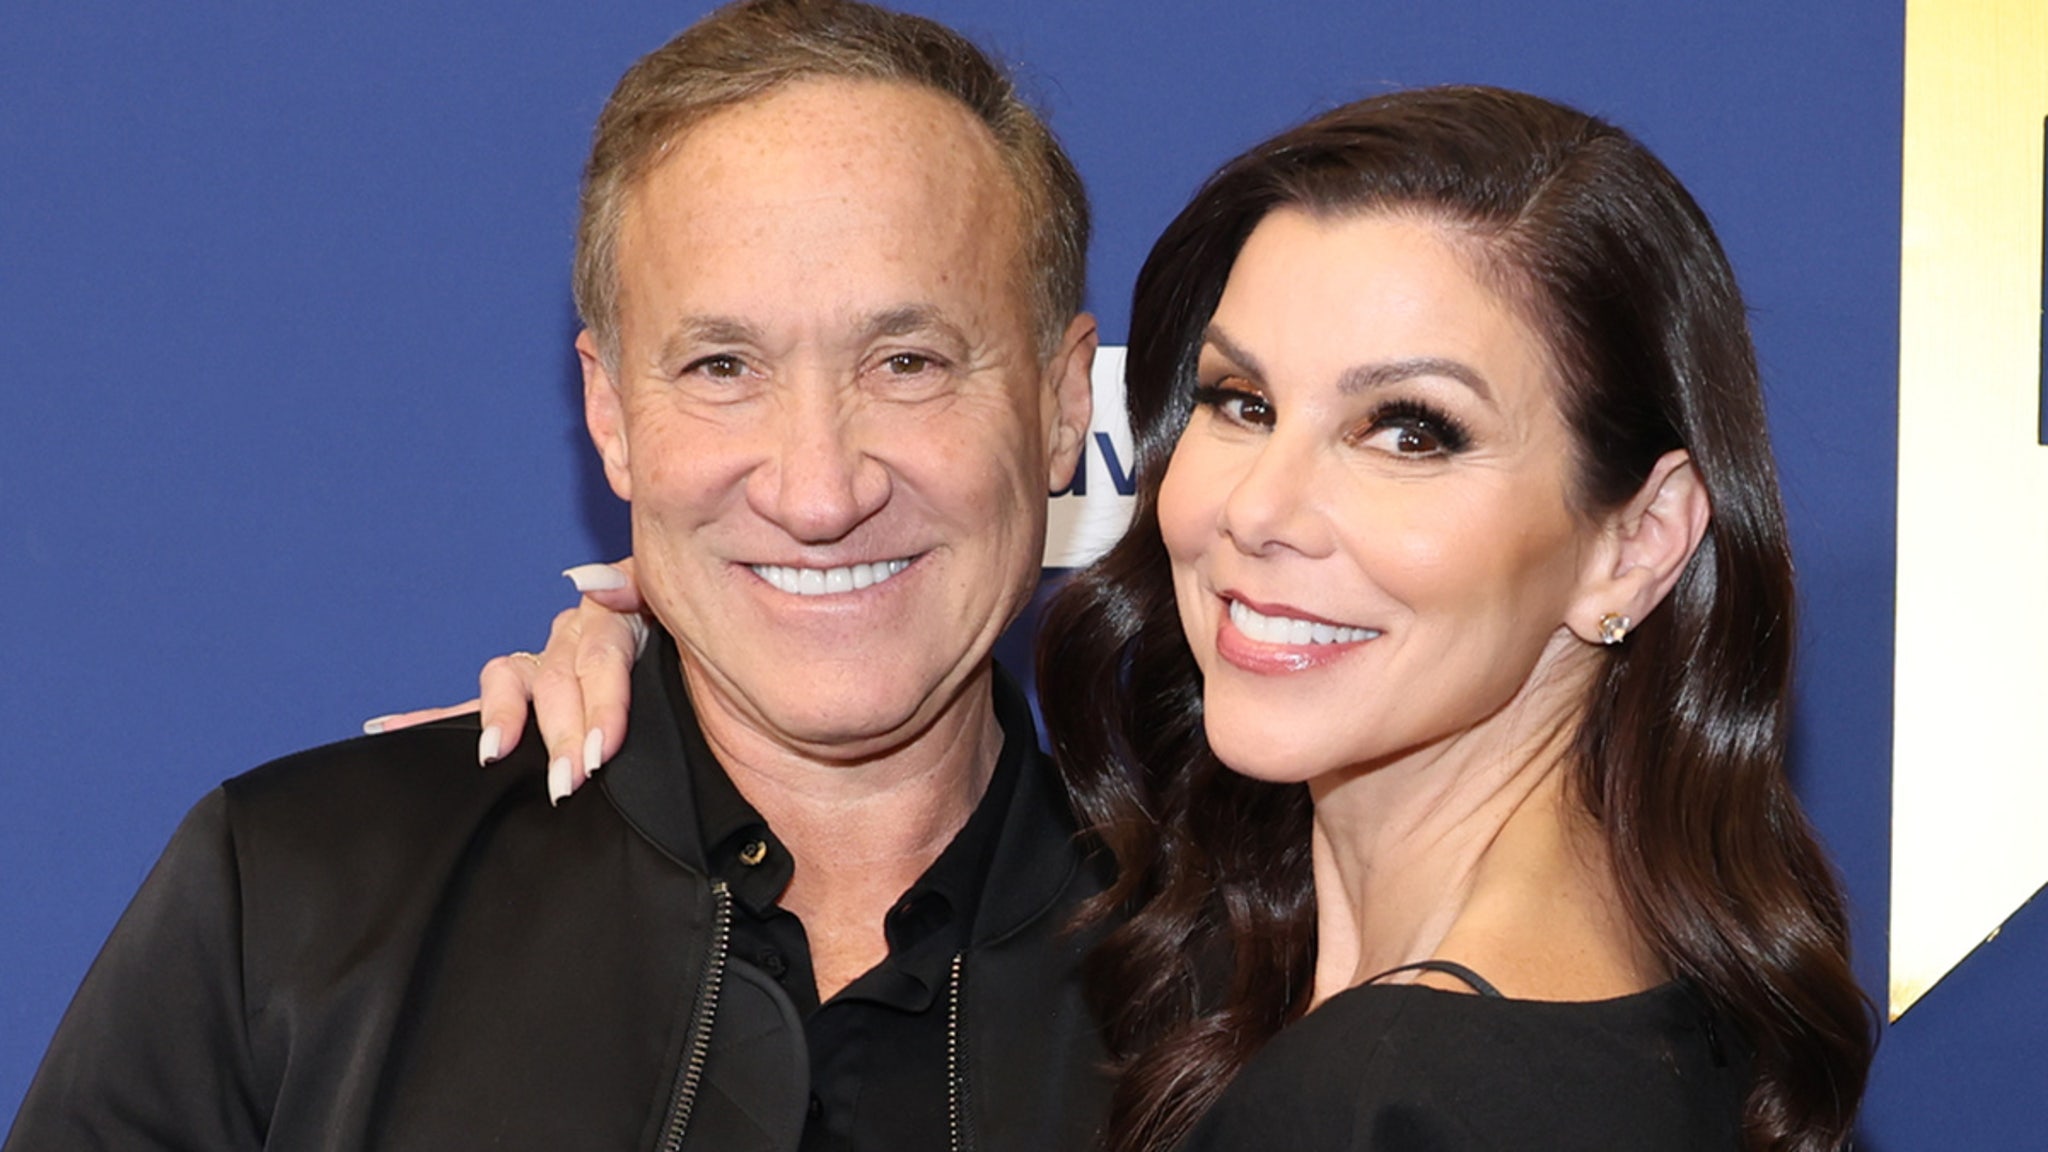 ‘Botched’ Star Terry Dubrow Says Wife Heather Saved His Life After Medical Scare